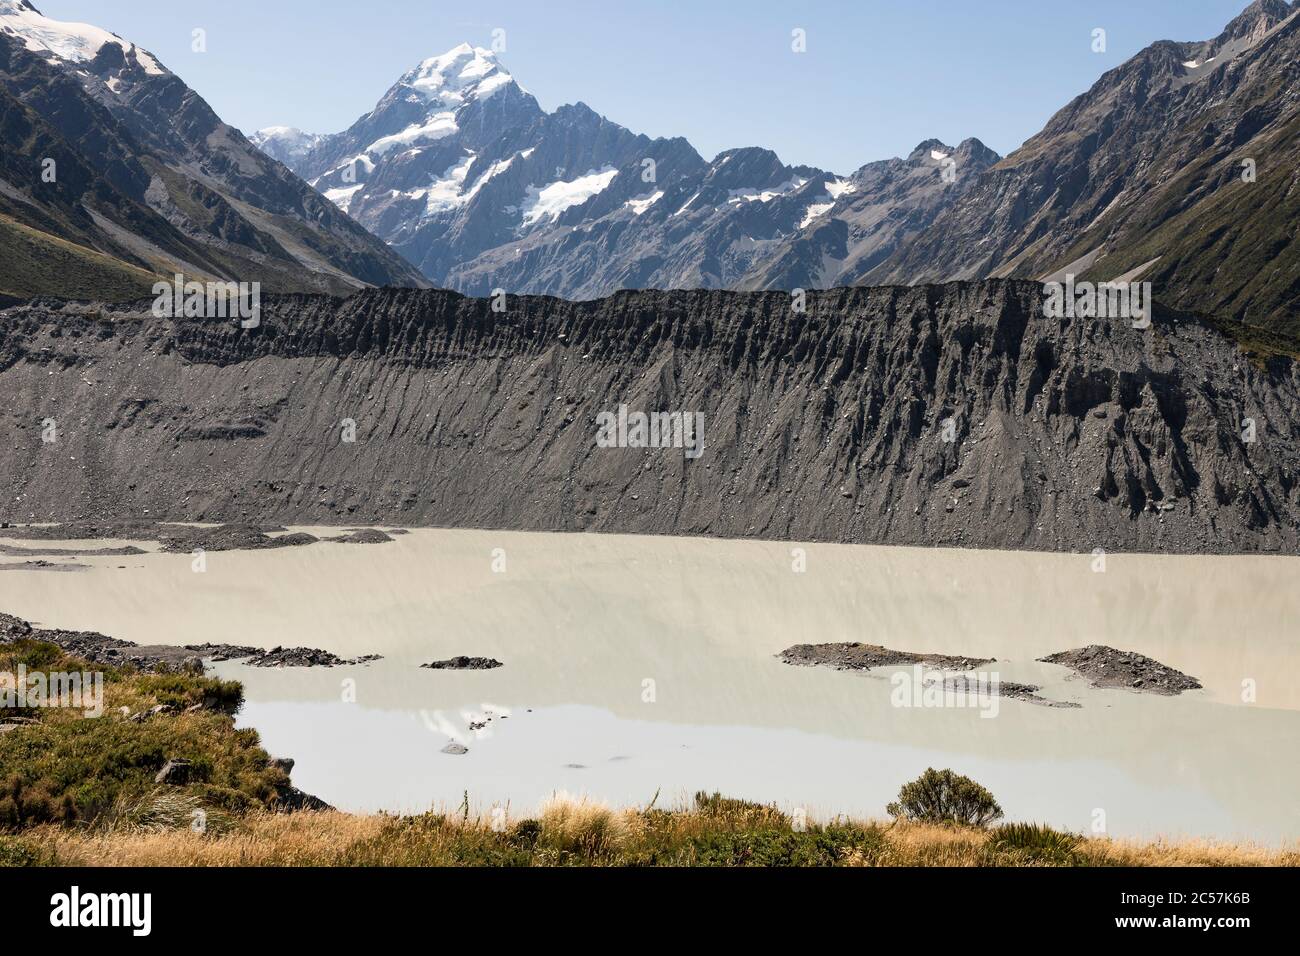 Mueller Lake and glacial moraine looking towards Mount Cook, Aoraki Mount Cook National Park, South Island, New Zealand Stock Photo